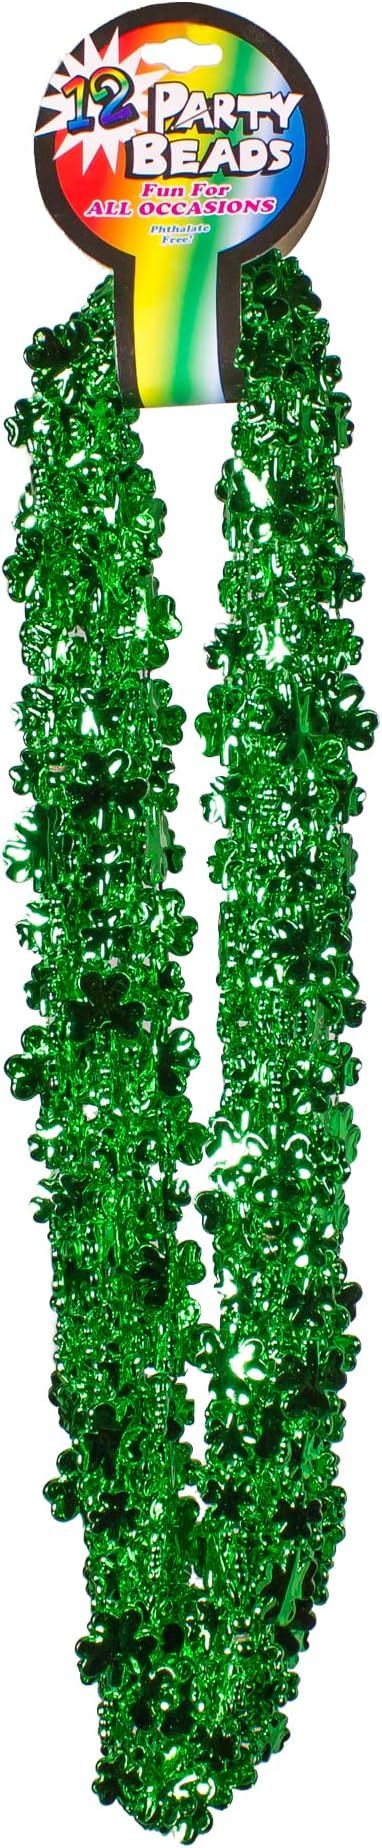 12 Pack St. Patrick's Day Shamrock Bead Necklaces - Green Irish Clover Party Favors for Celebrati... | Amazon (US)